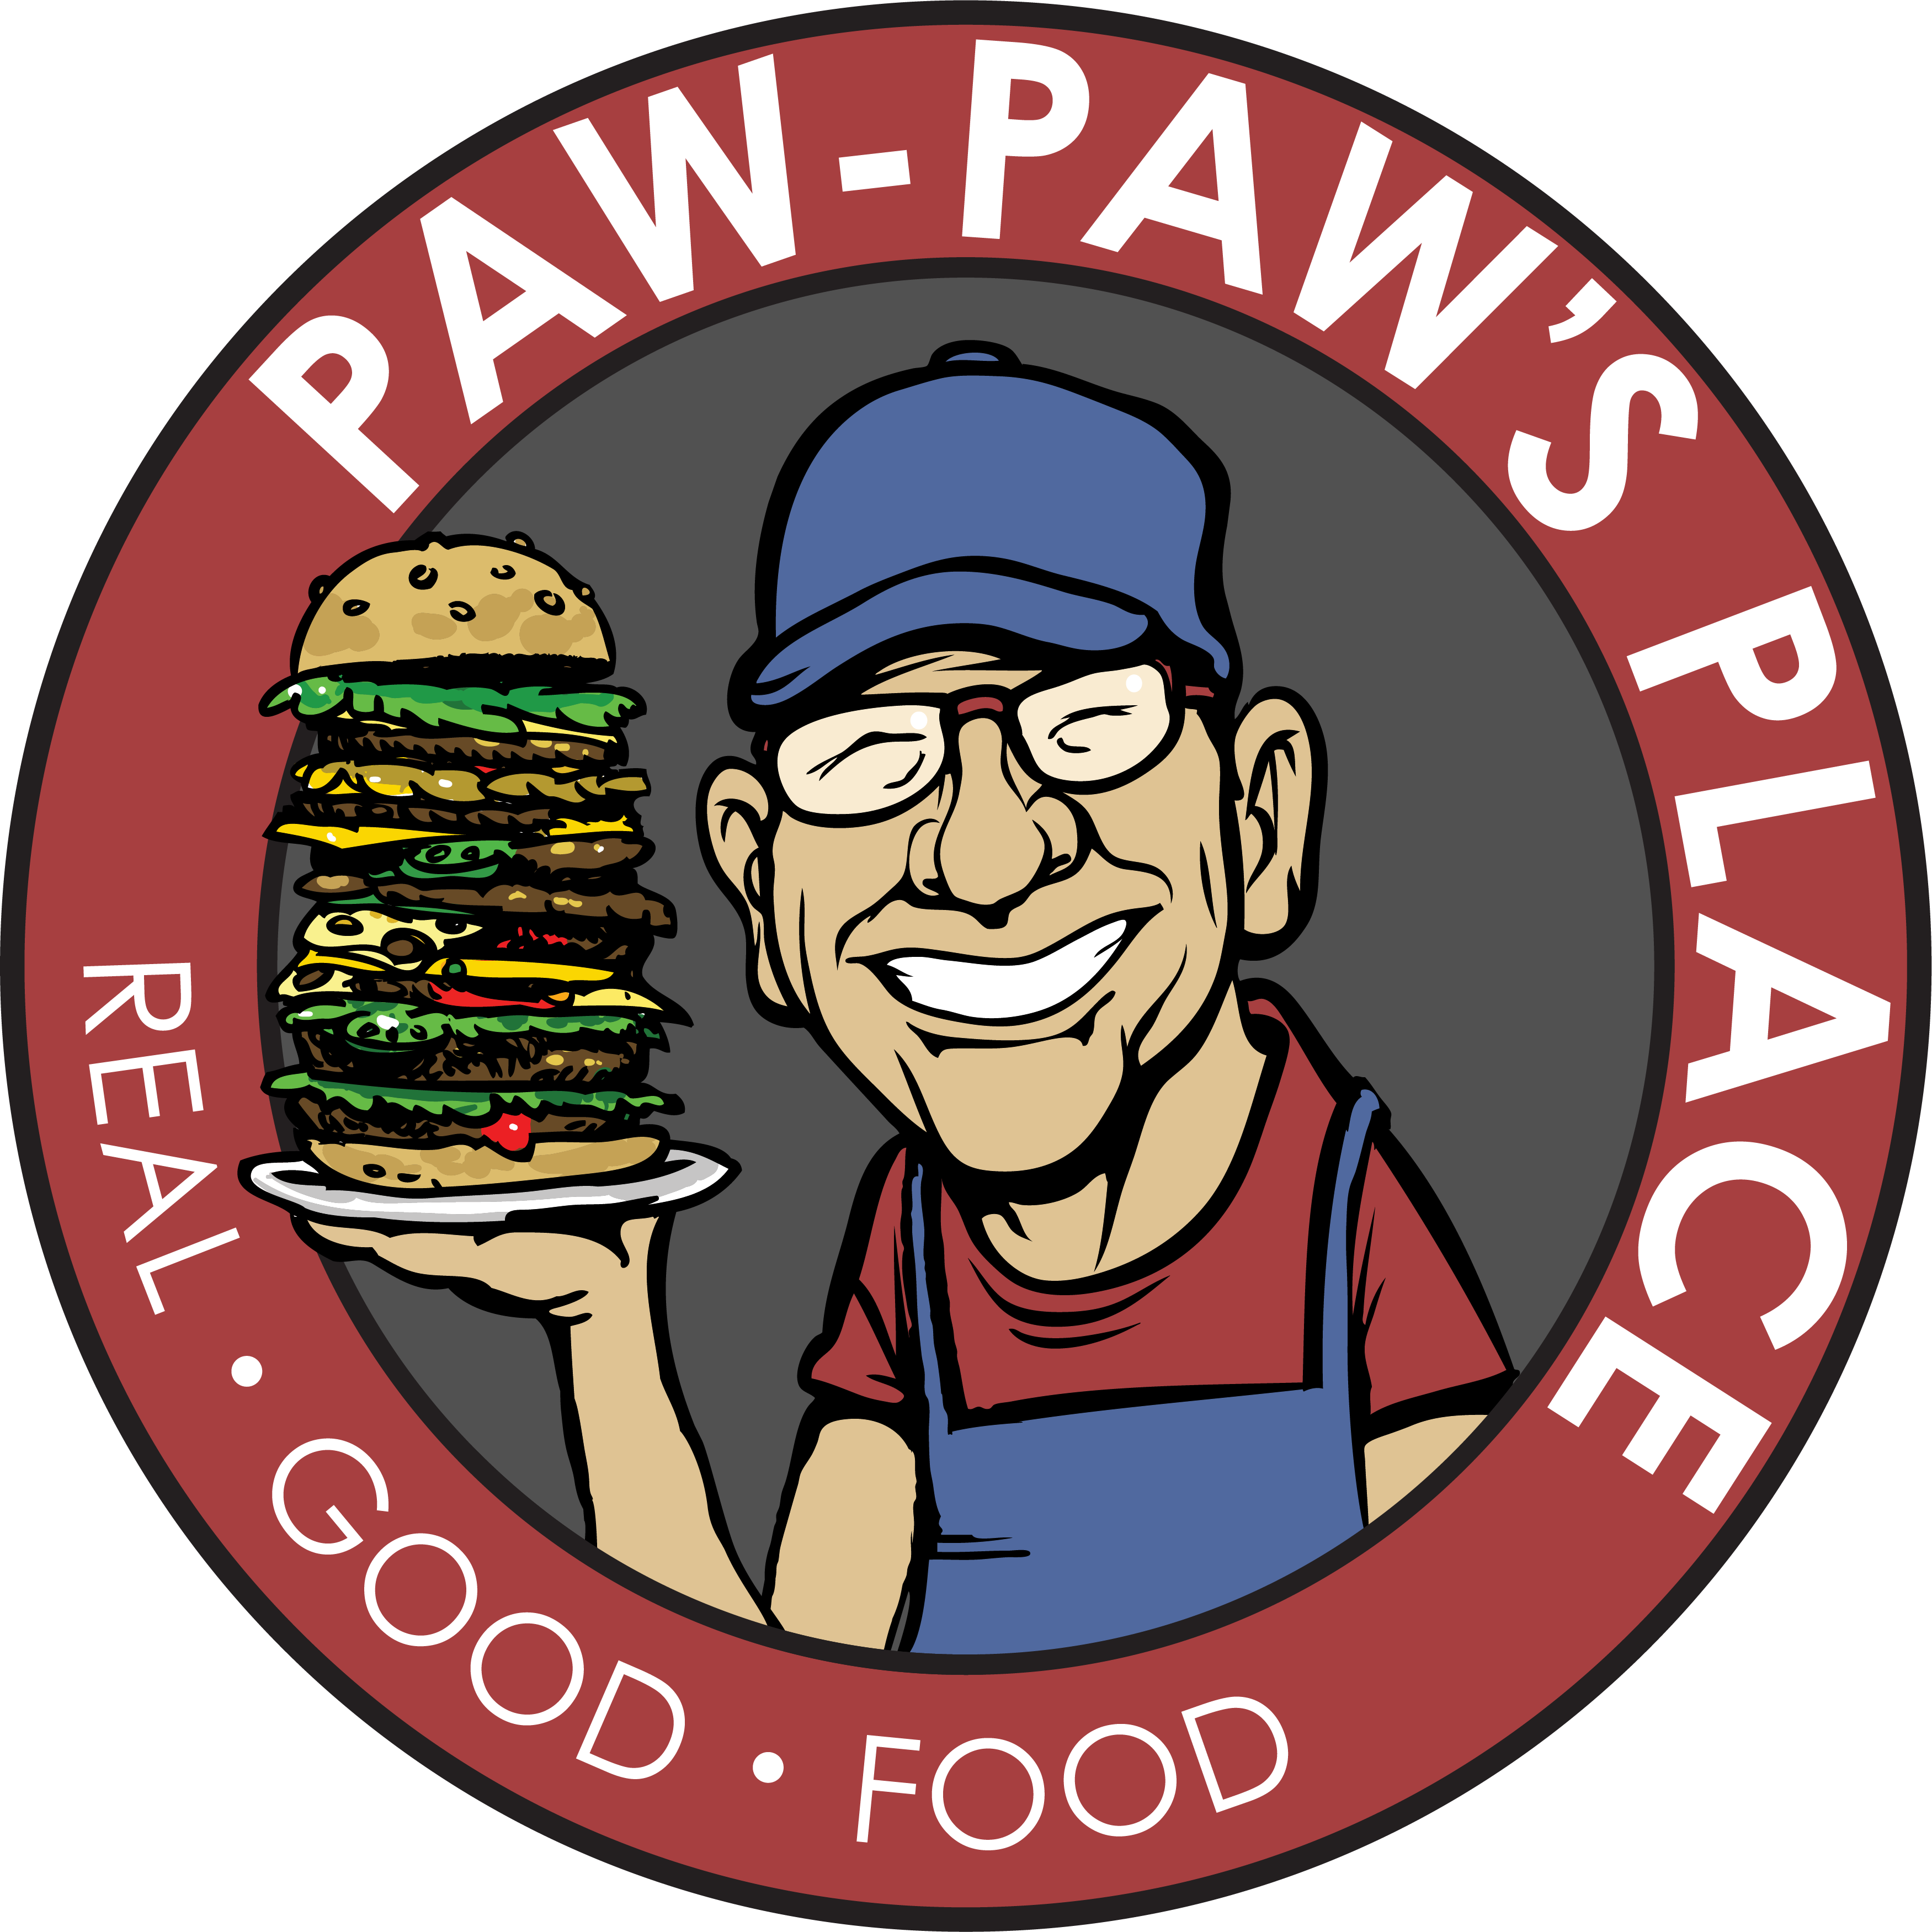 Paw-Paw's Place